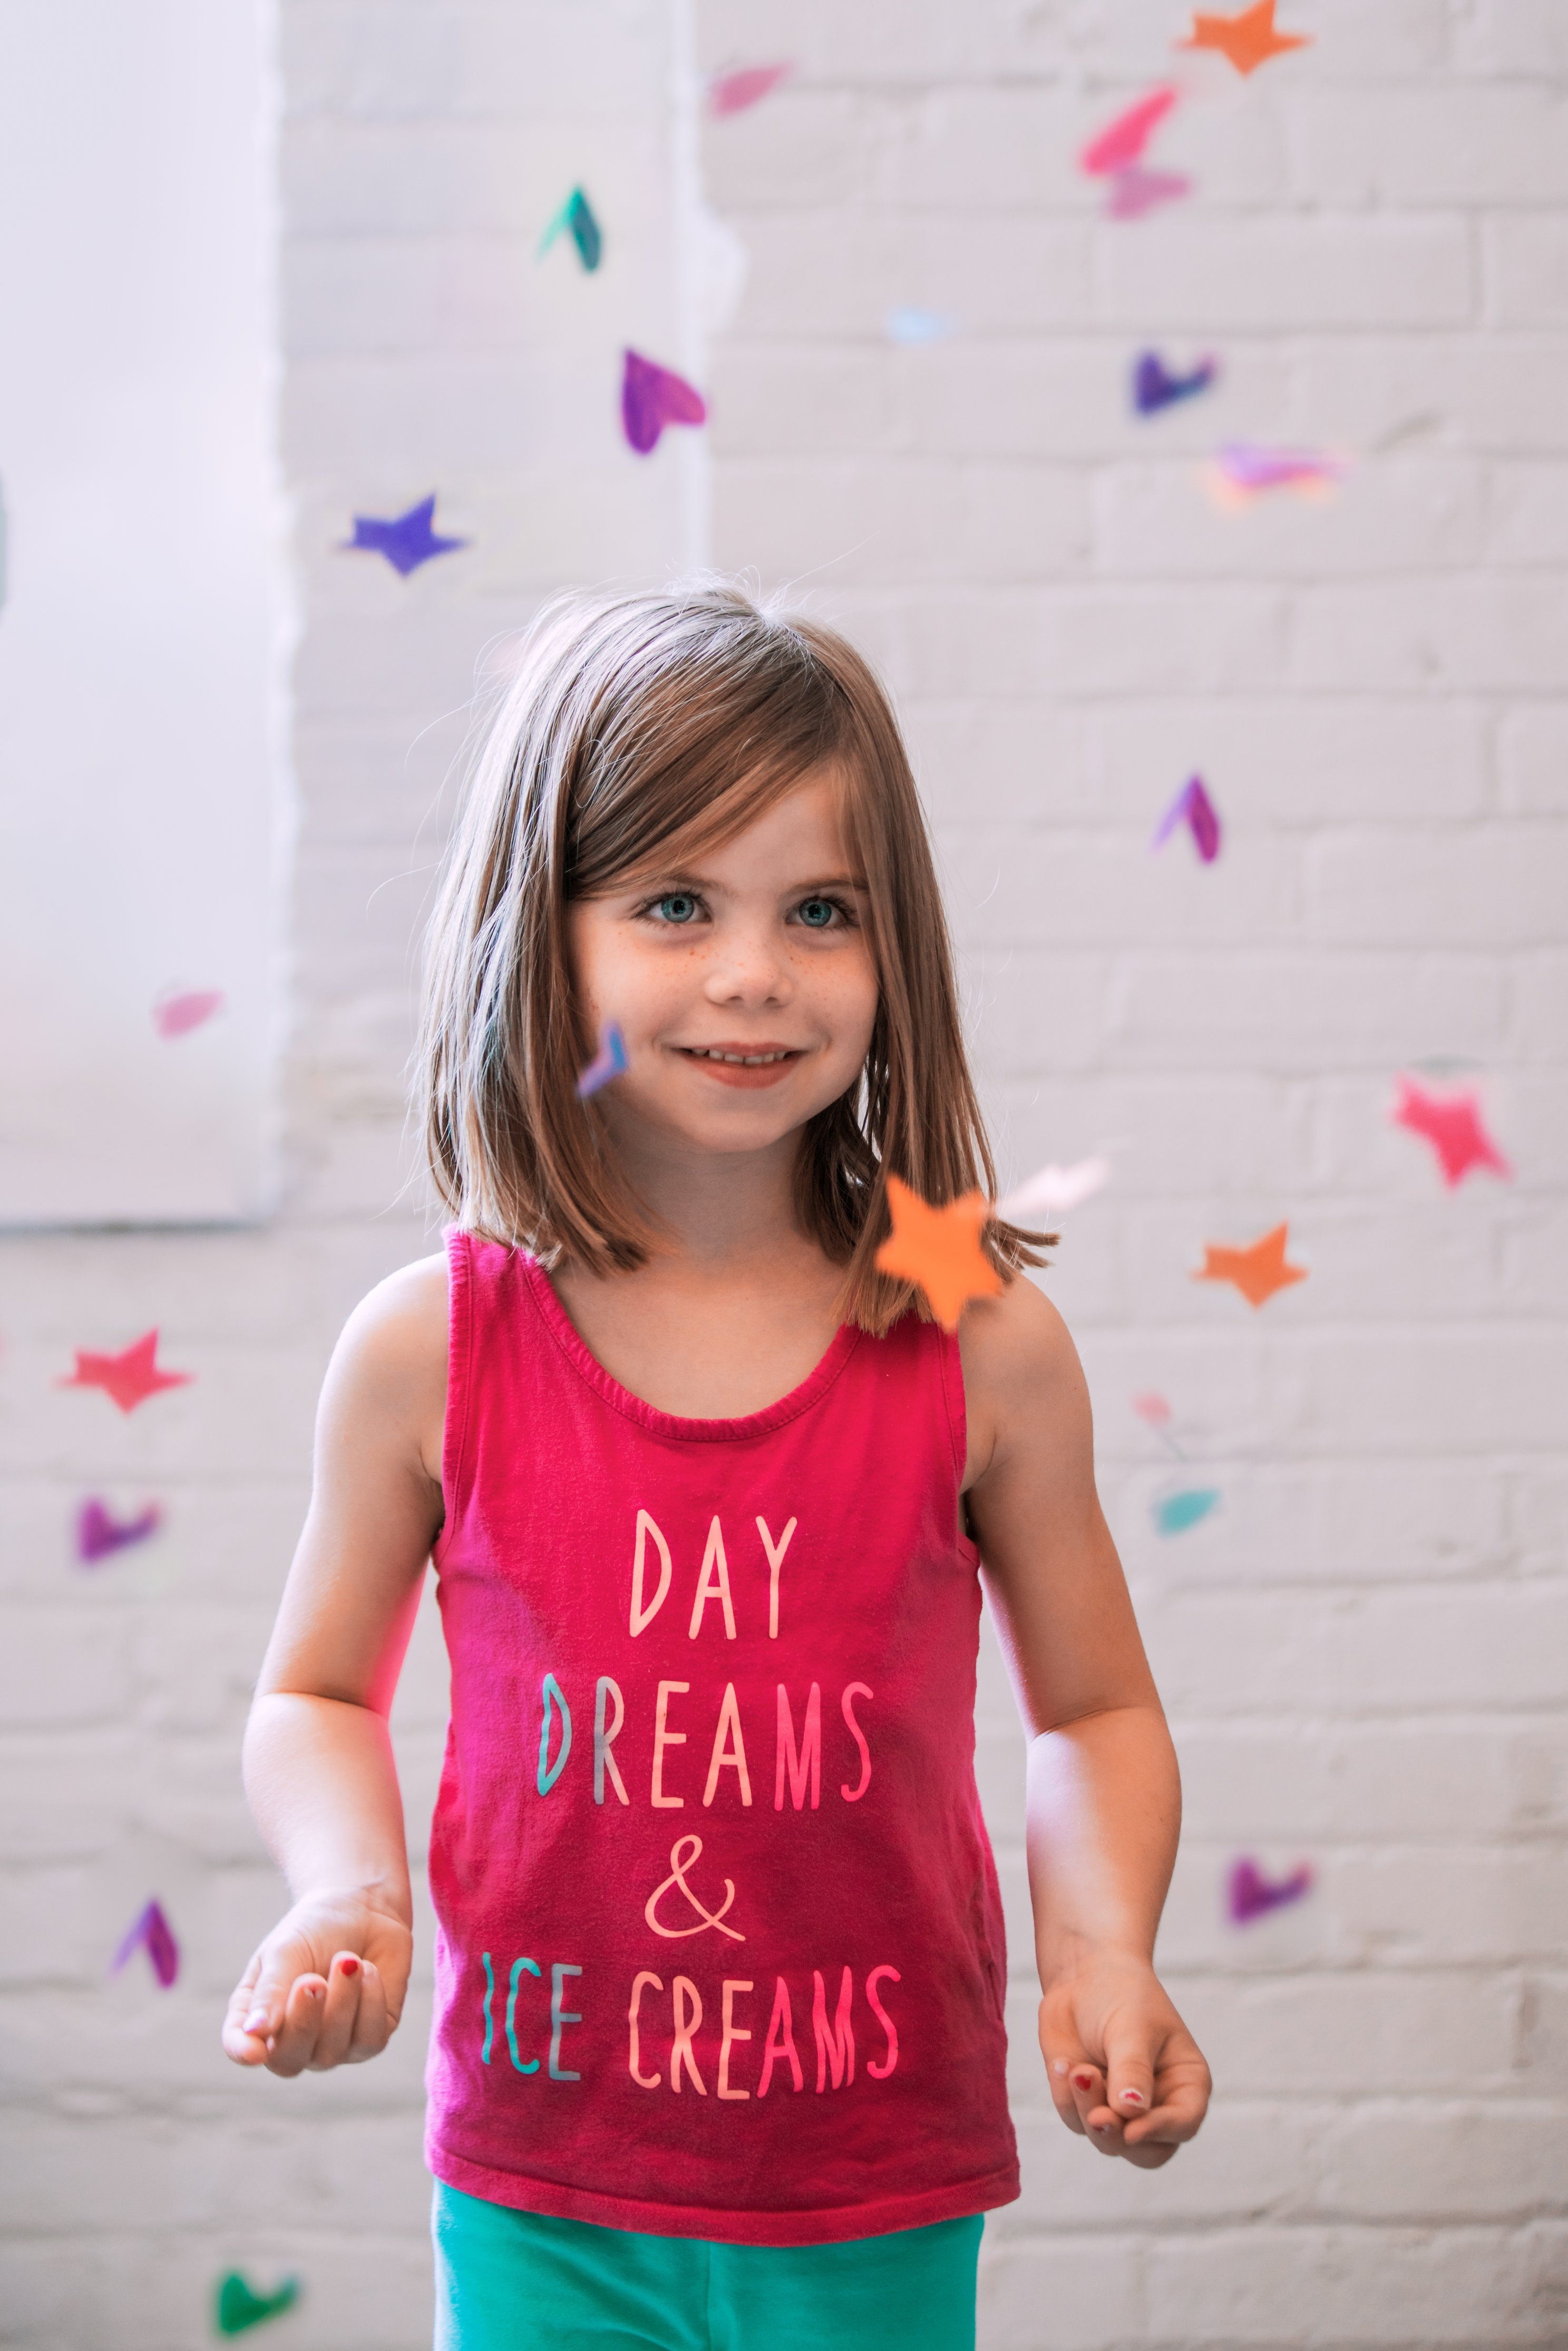 Day Dreams & Ice Cream! How to Plan a Kid's Birthday Party #kidsparty #partyinspo #sendomatic #party #partytheme